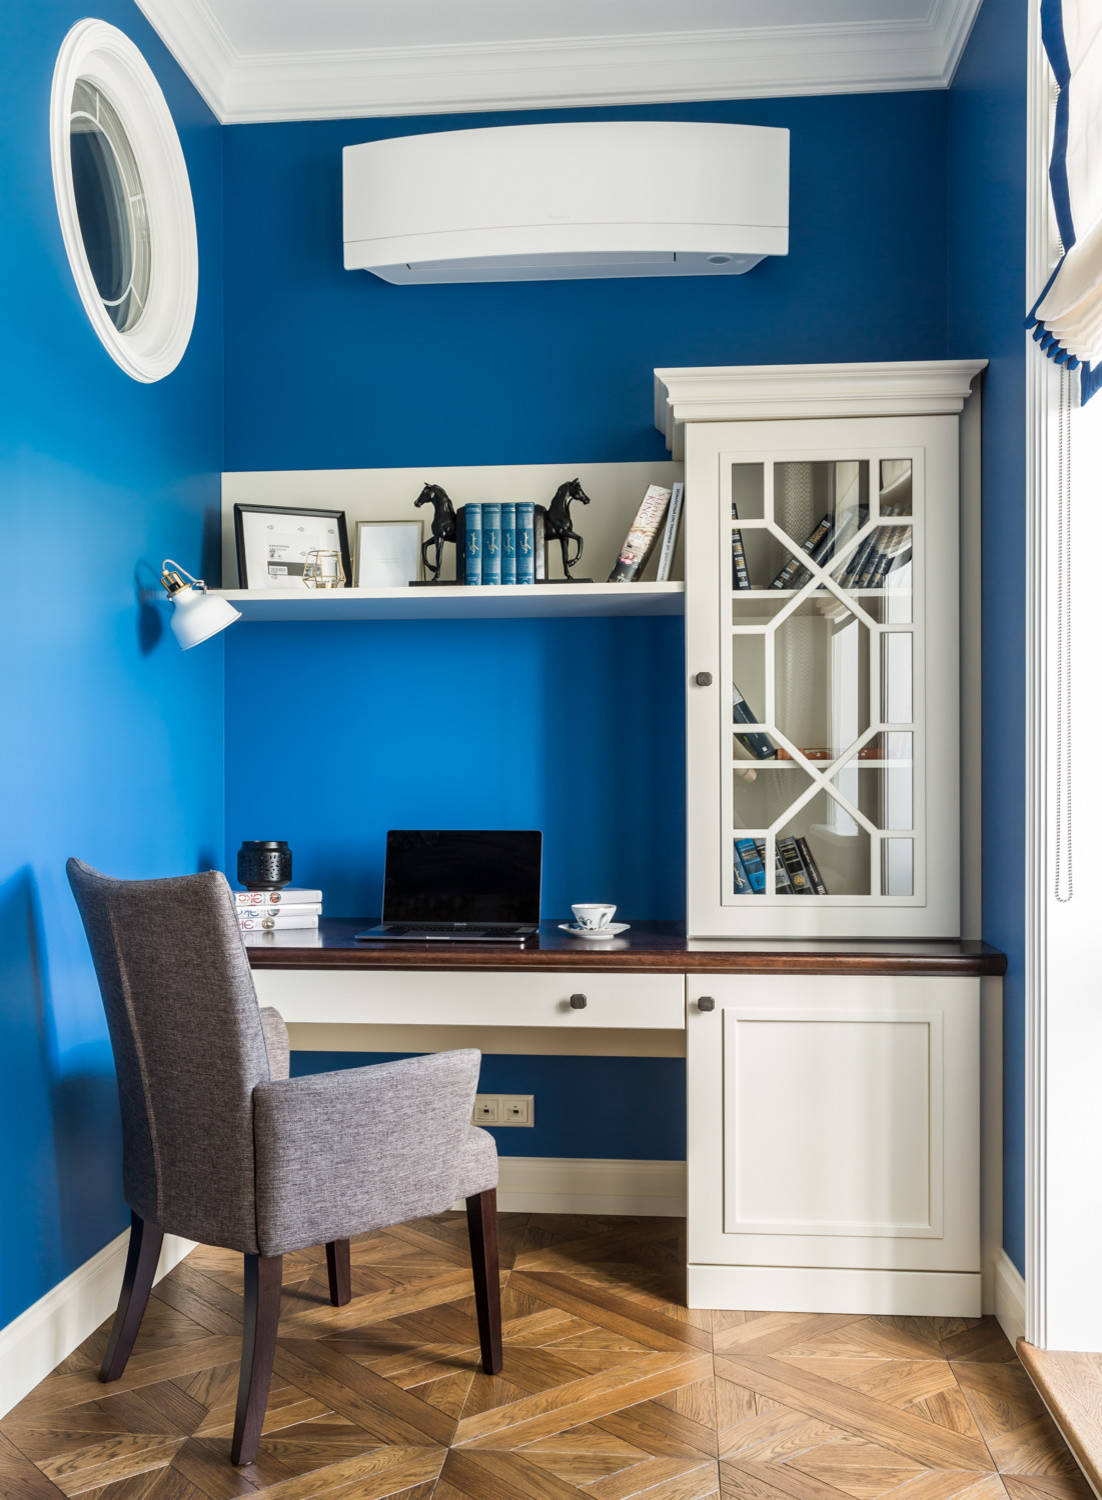 999 beautiful wallpaper home office pictures ideas november 2020 houzz 999 beautiful wallpaper home office